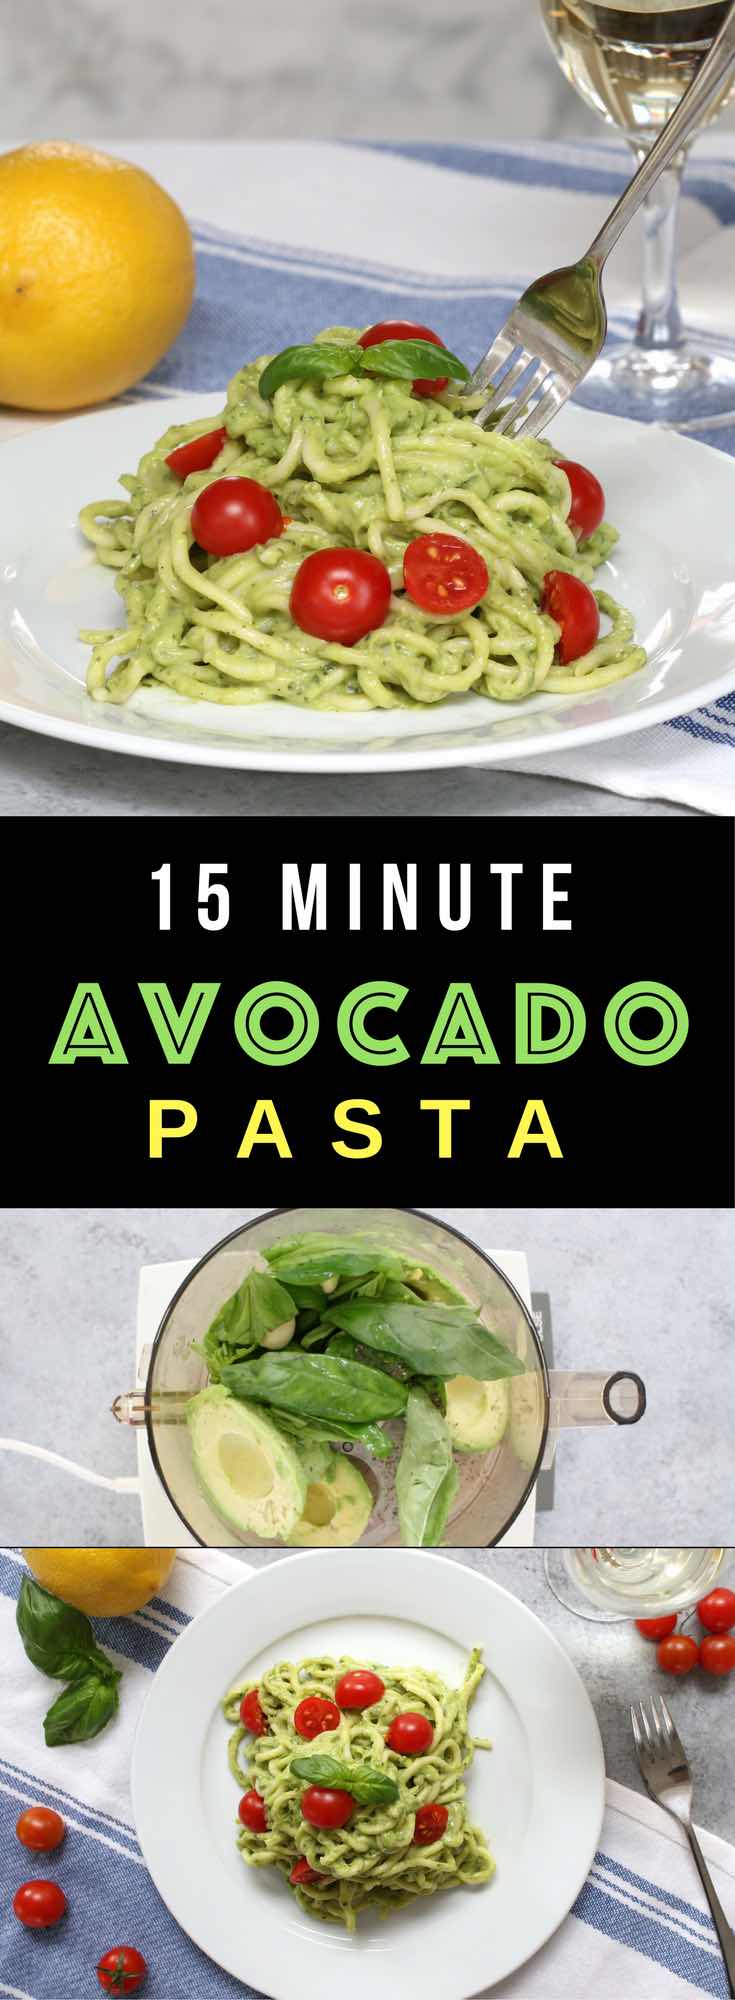 Easy, healthy, and on the table in about 15 minutes! Creamy Avocado Pasta is the easiest and best avocado sauce pasta. All you need is a few simple ingredients: spaghetti, ripe avocados peeled and halved, fresh basil leaves, lemon, salt and pepper, olive oil and cherry tomatoes. Quick and easy lunch or dinner recipe. Eat without guilt. Vegetarian. Video recipe. 